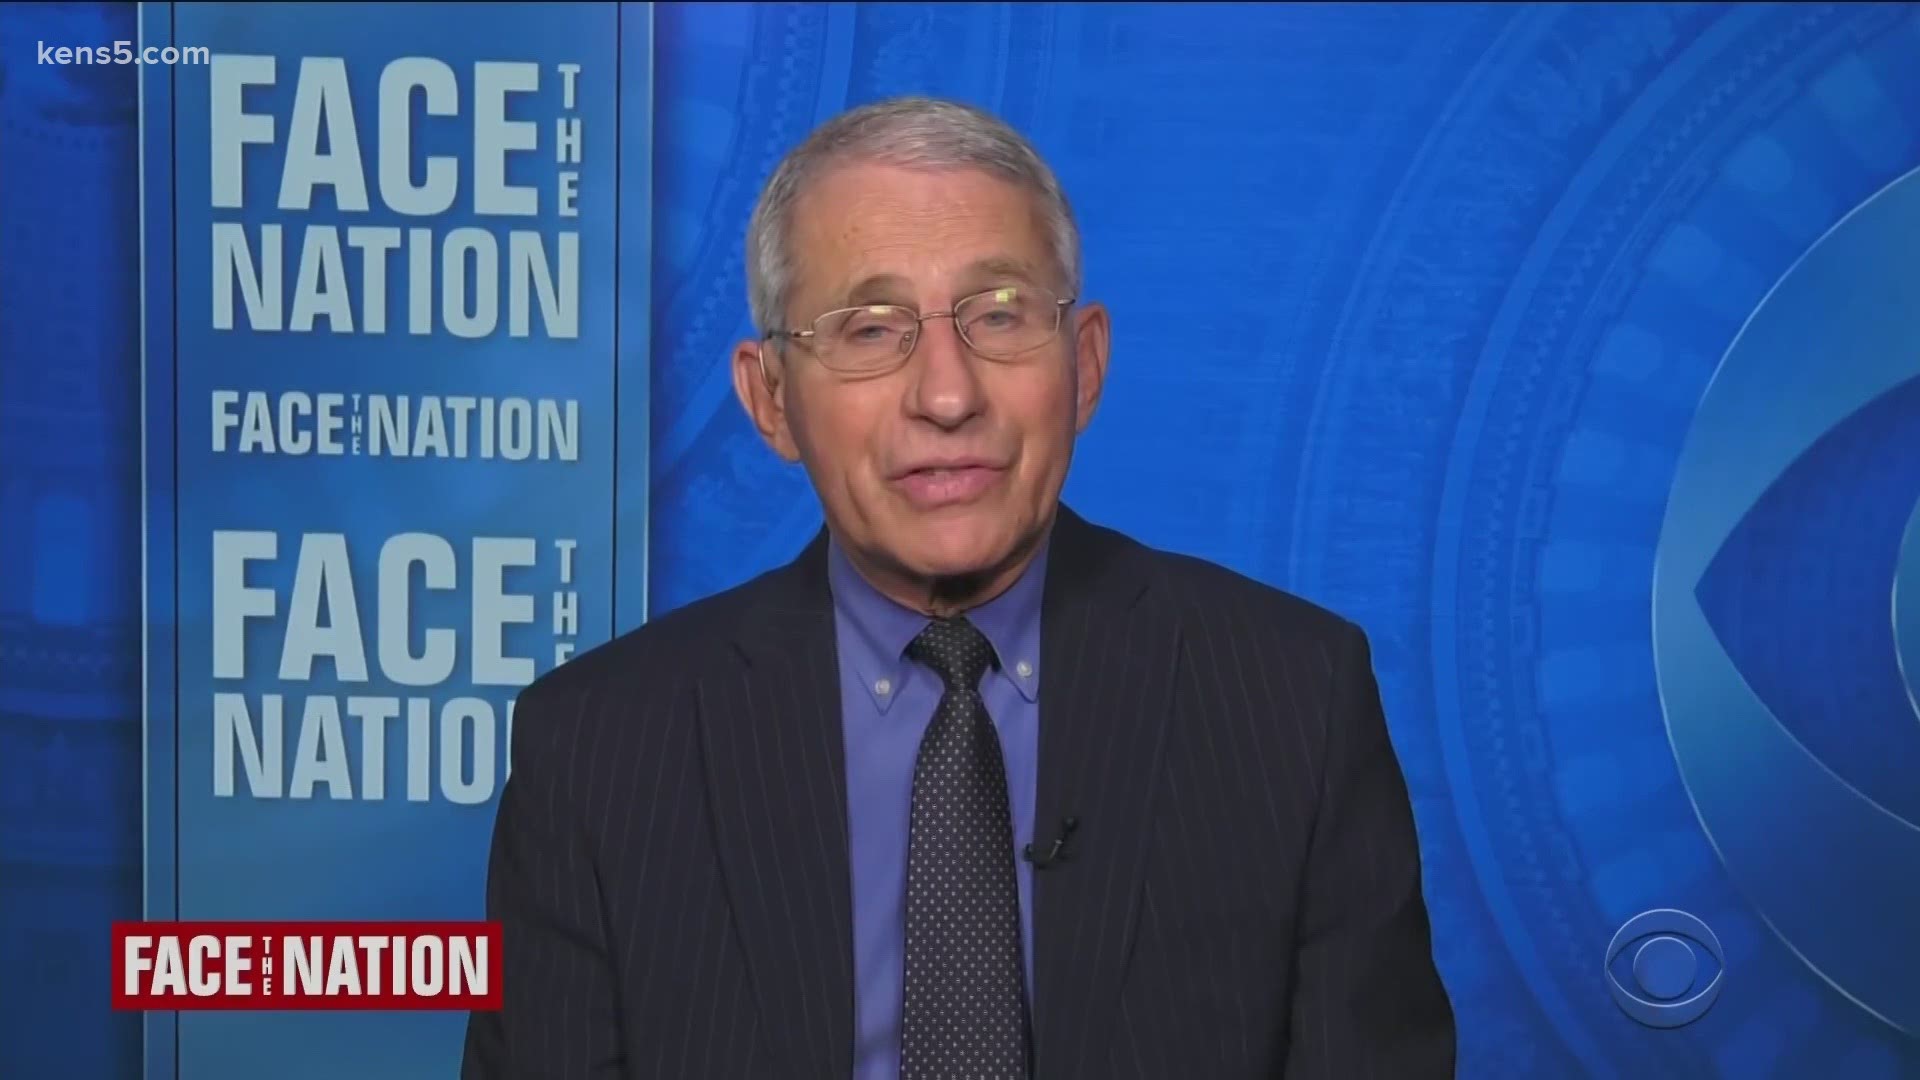 Fauci said that the United States would see a large increase in the amount of vaccine available soon, but now is not the time to let your guard down.